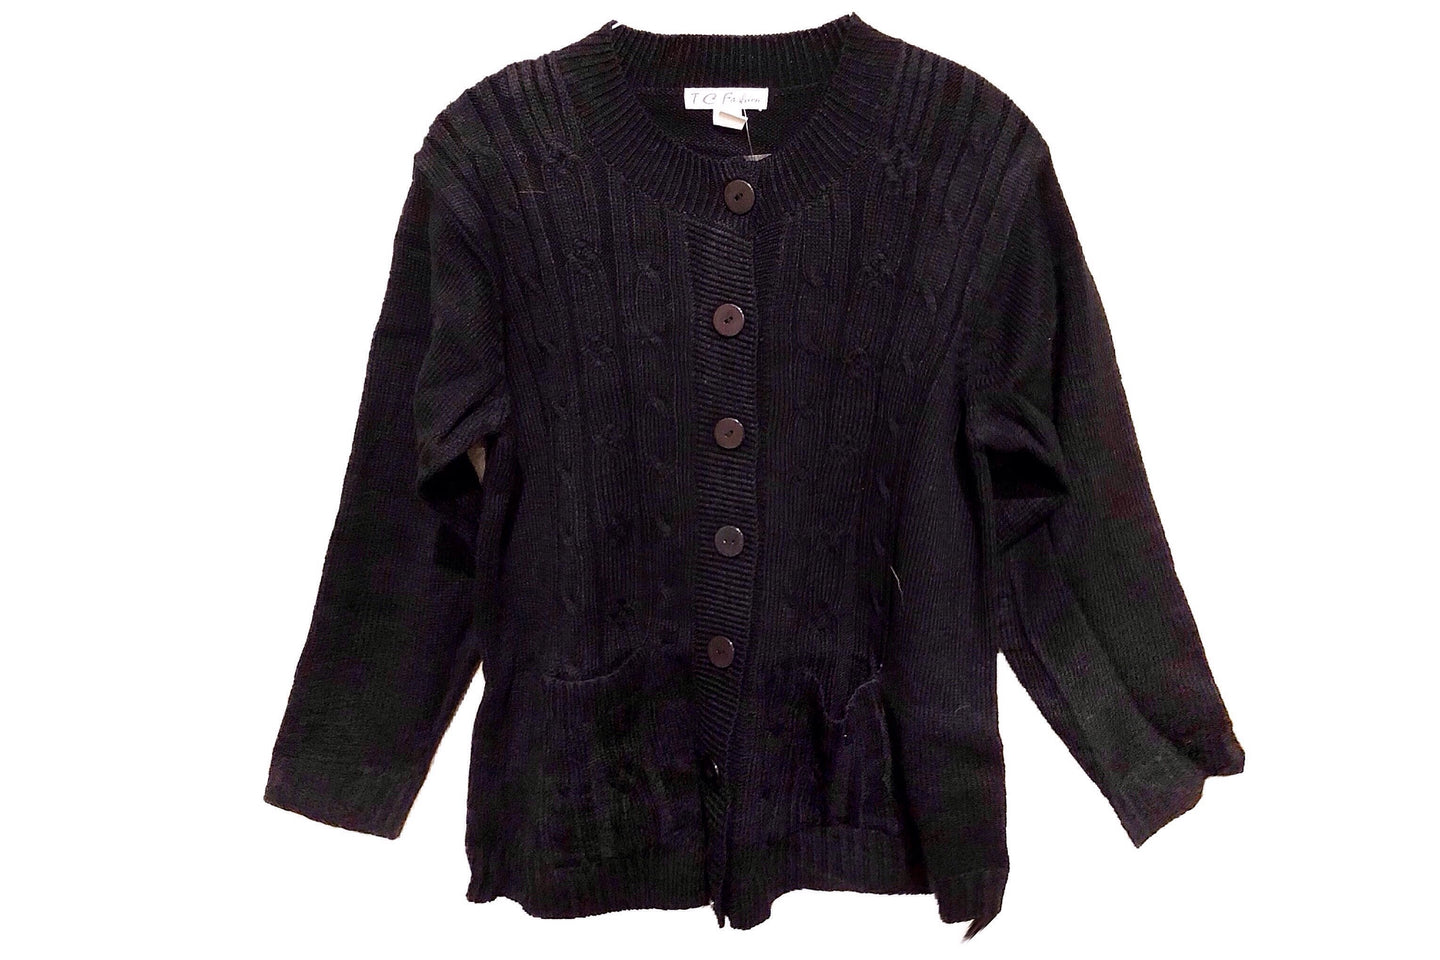 Chunky Cable Knit Sweater Cardigan (Black I)